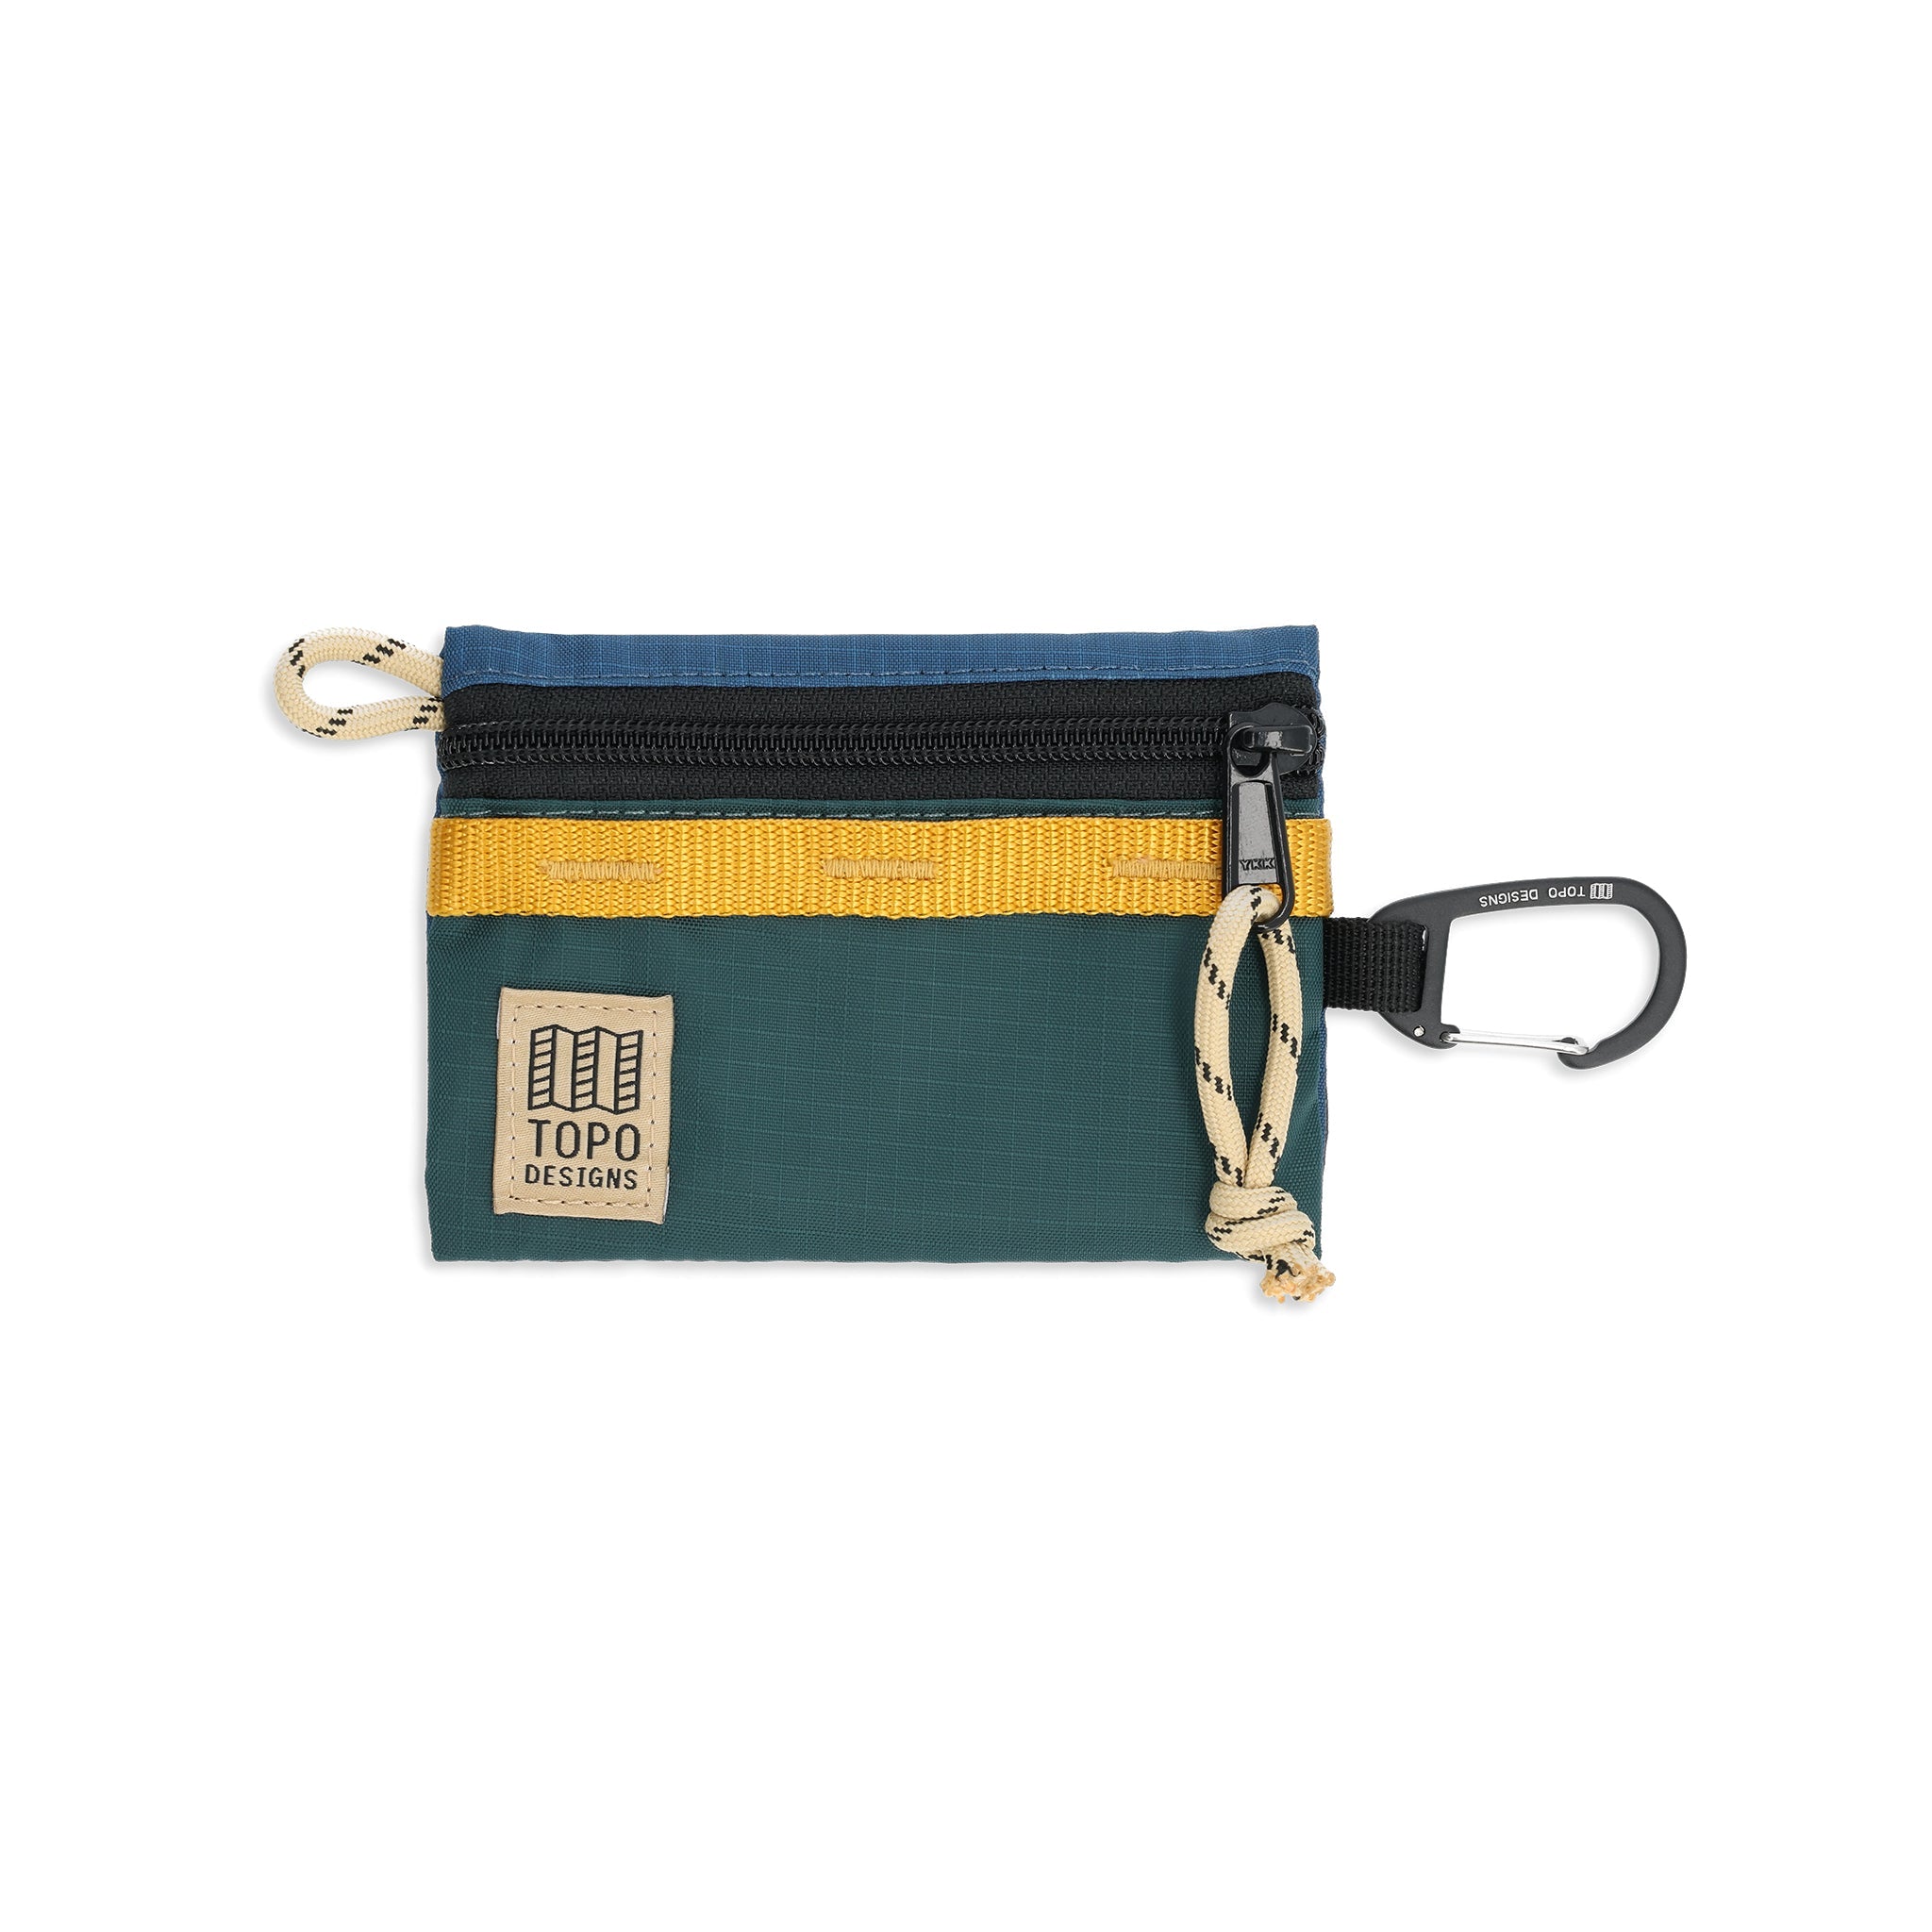 Front View of Topo Designs Mountain Accessory Bag in "Pond Blue / Forest"